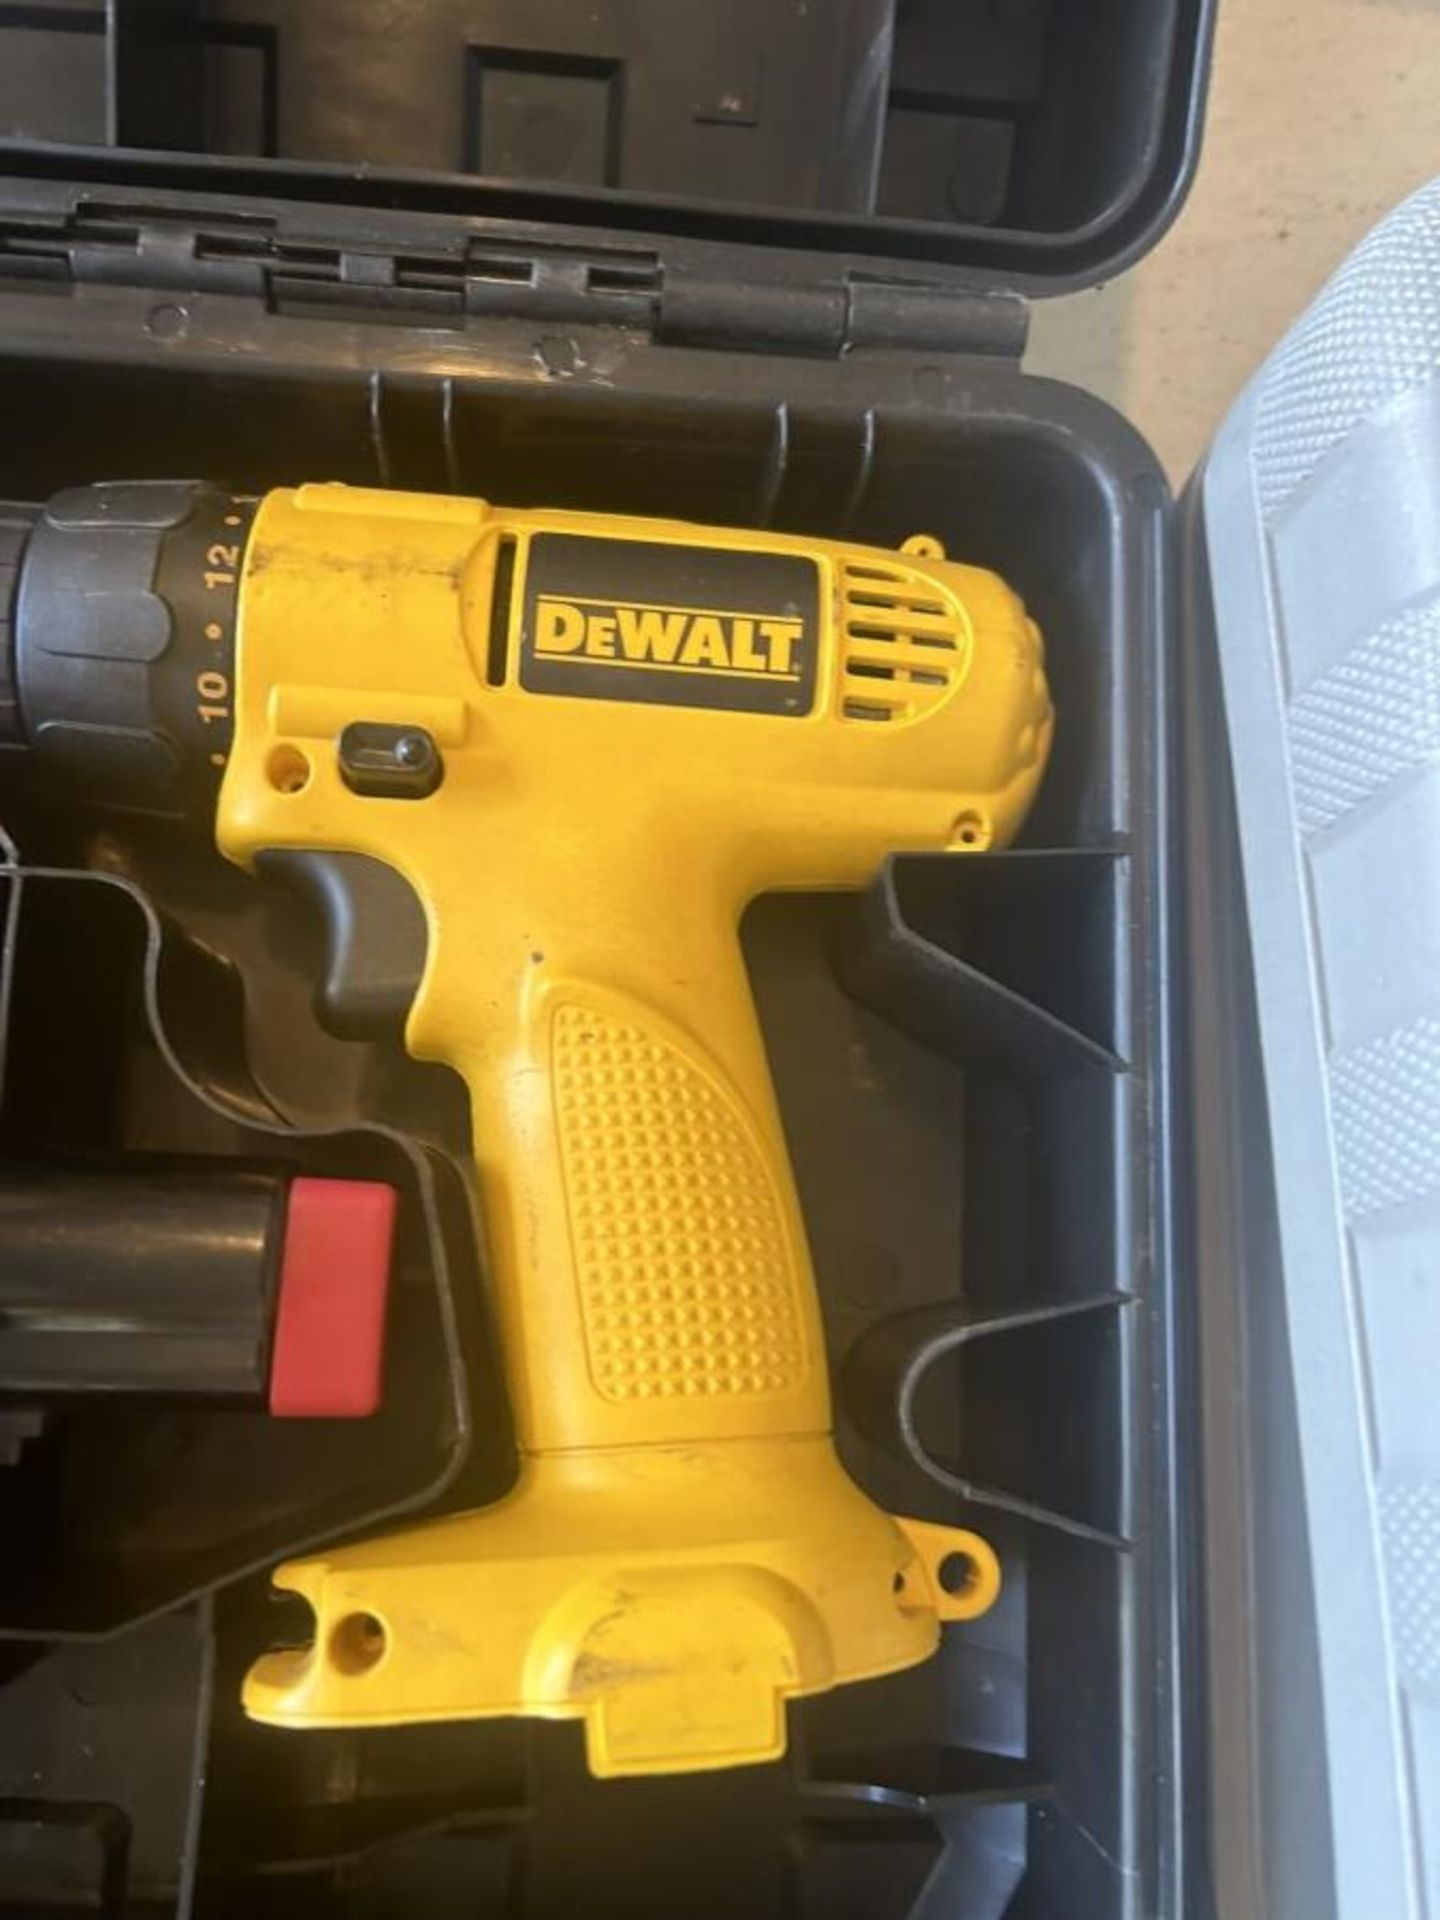 DEWALT 12V CORDLESS DRILL AND CRAFTSMAN CORDLESS DRILL W/ BATTERIES AND CHARGERS - Image 2 of 5